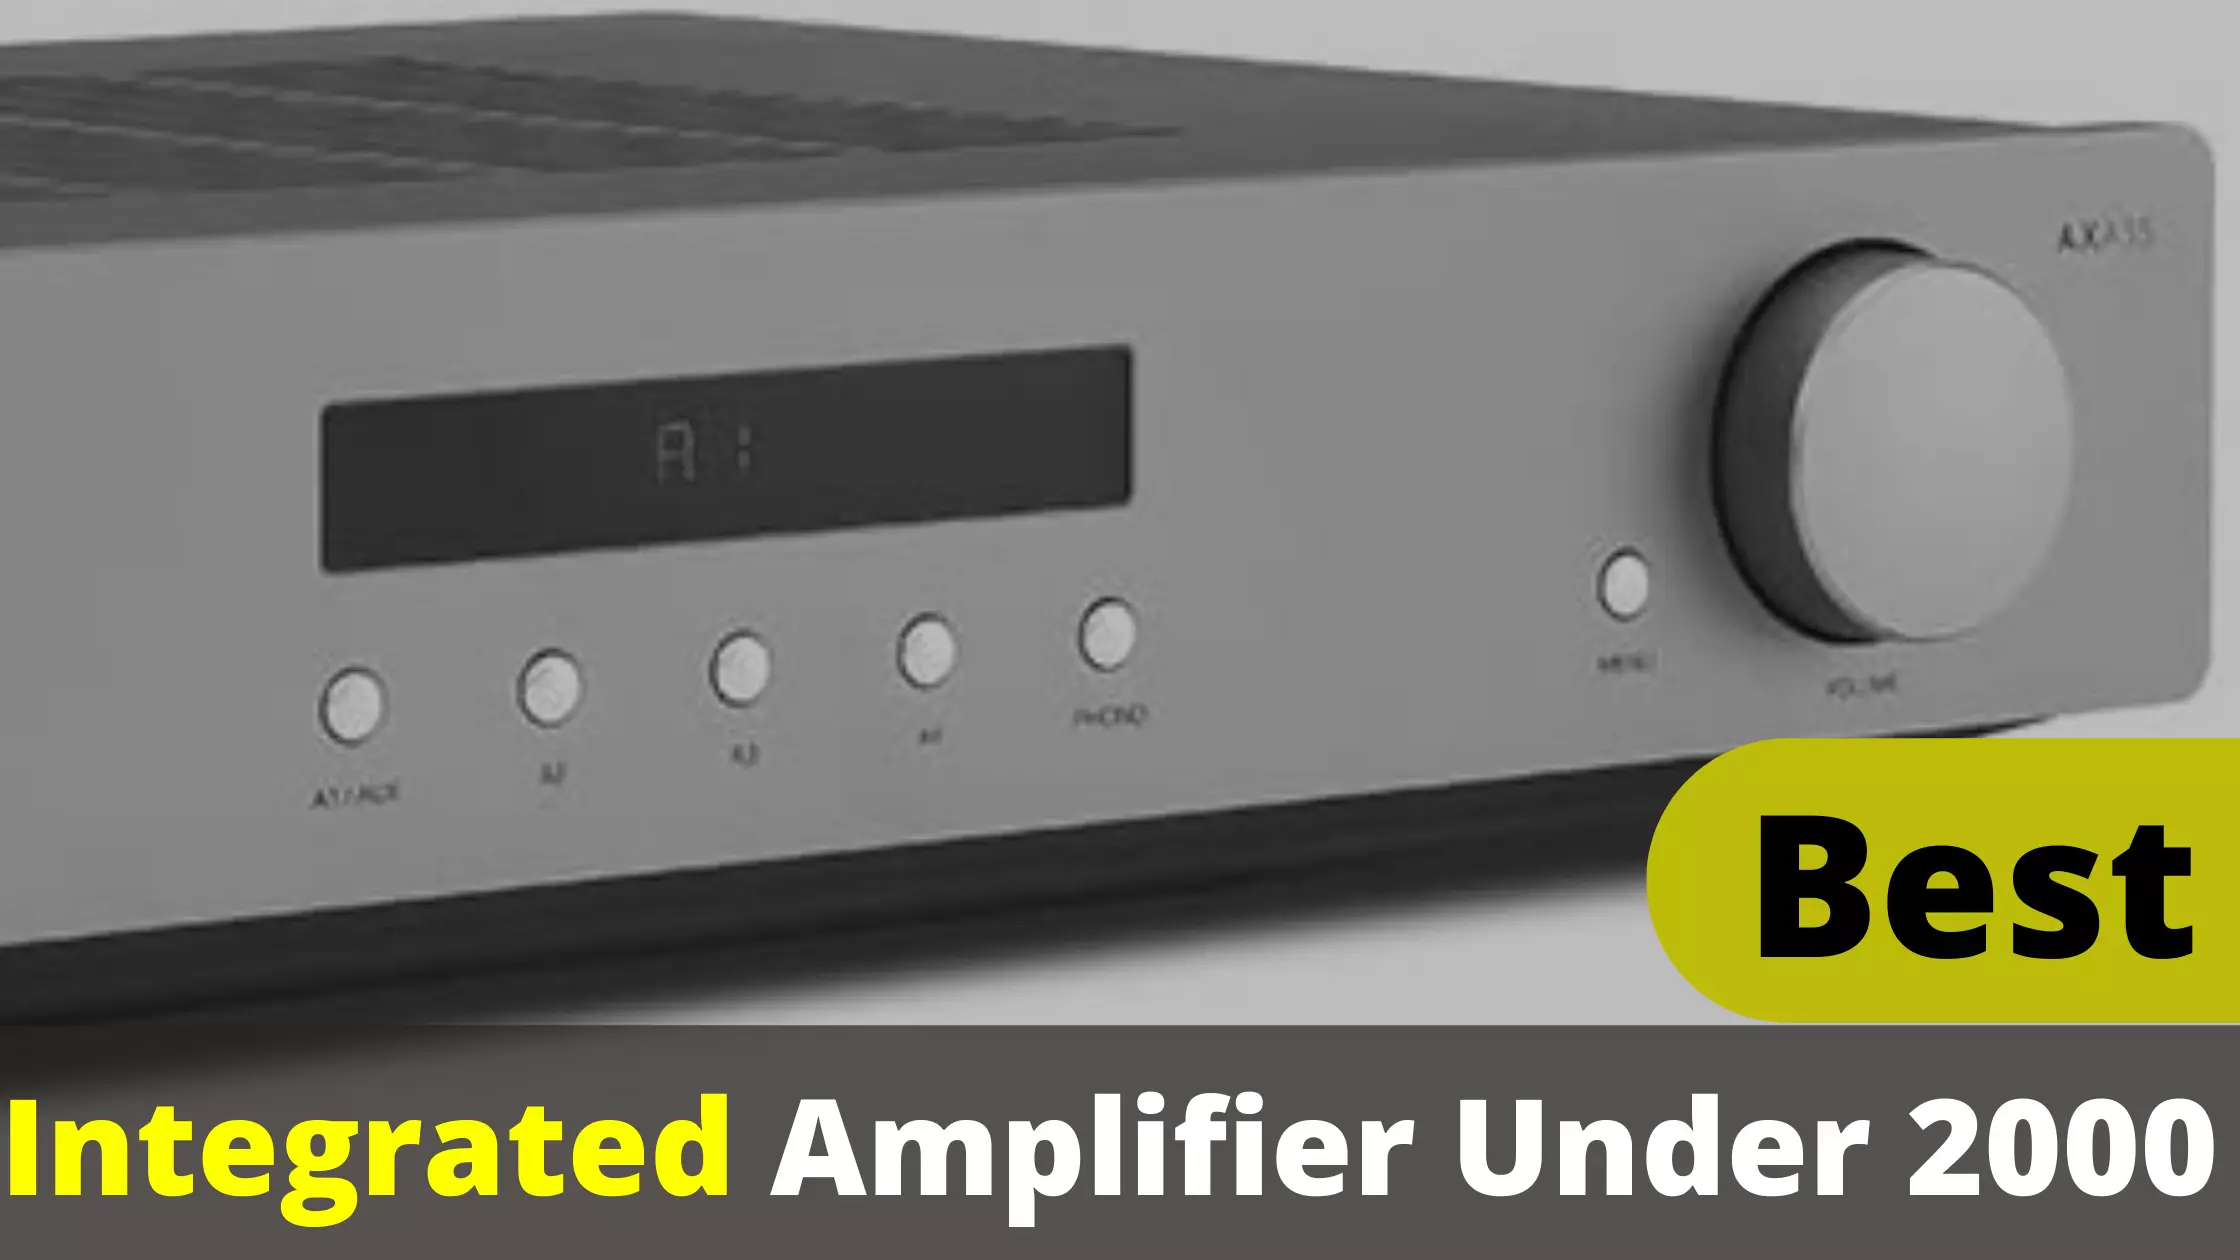 Best Integrated Amplifier Under $2000 Dollars Latest Guide